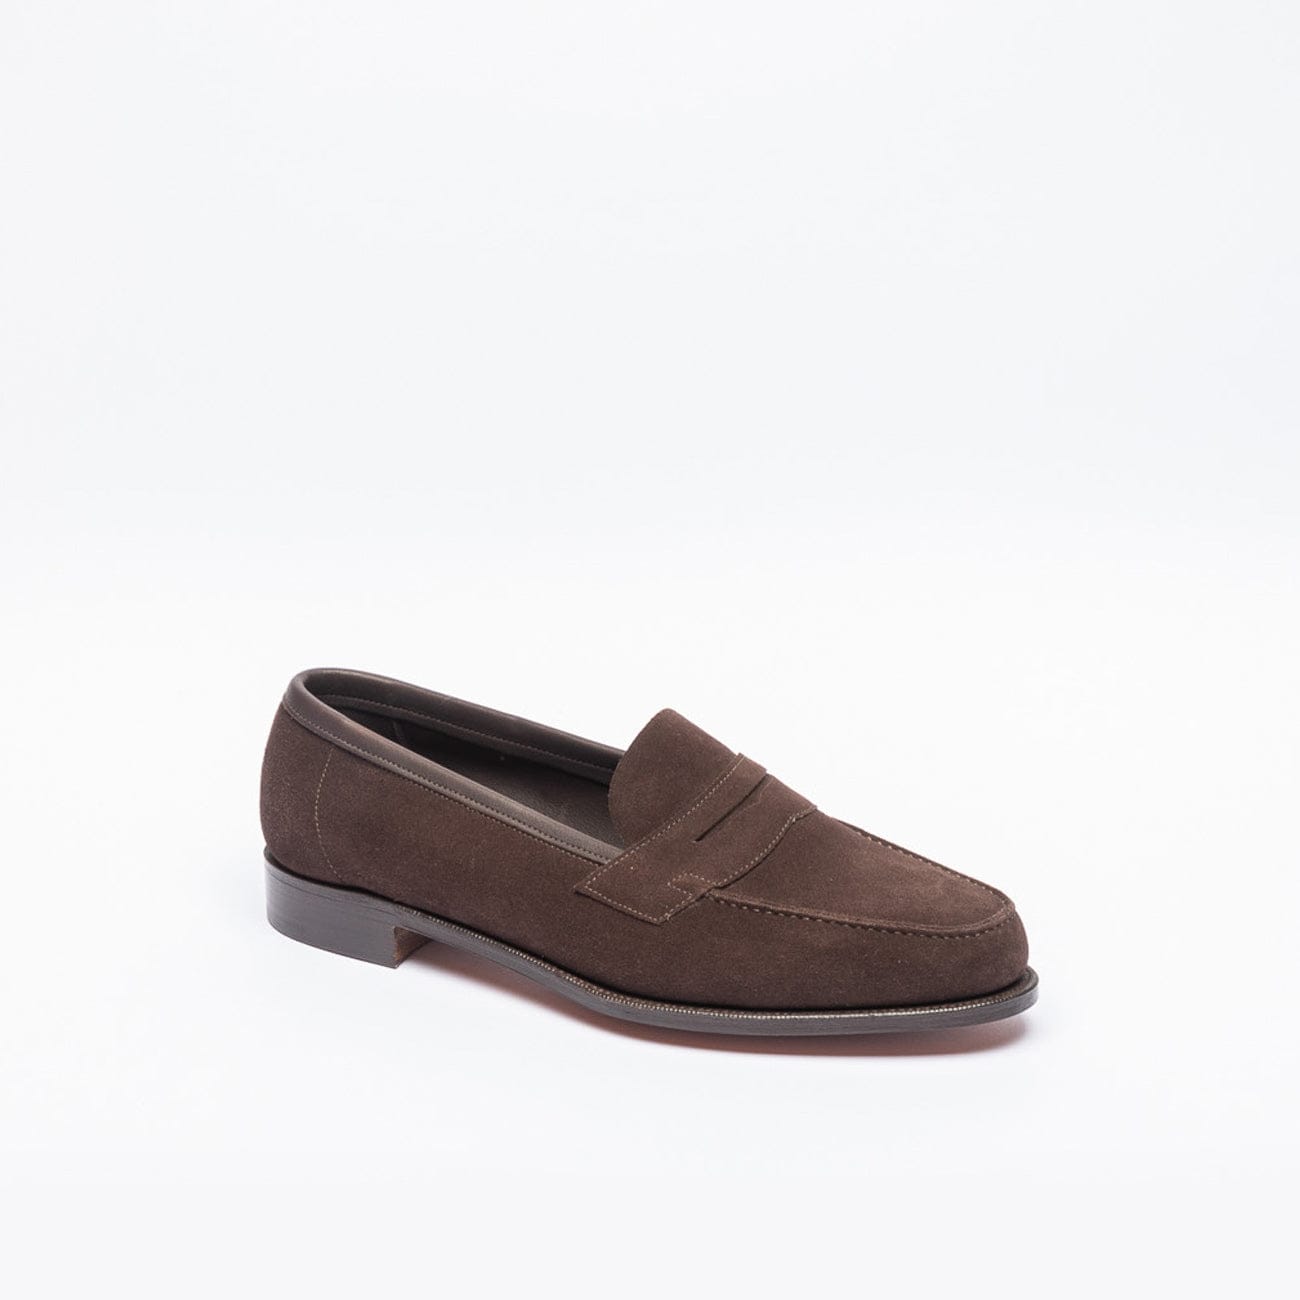 Espresso Suede Unlined Loafer